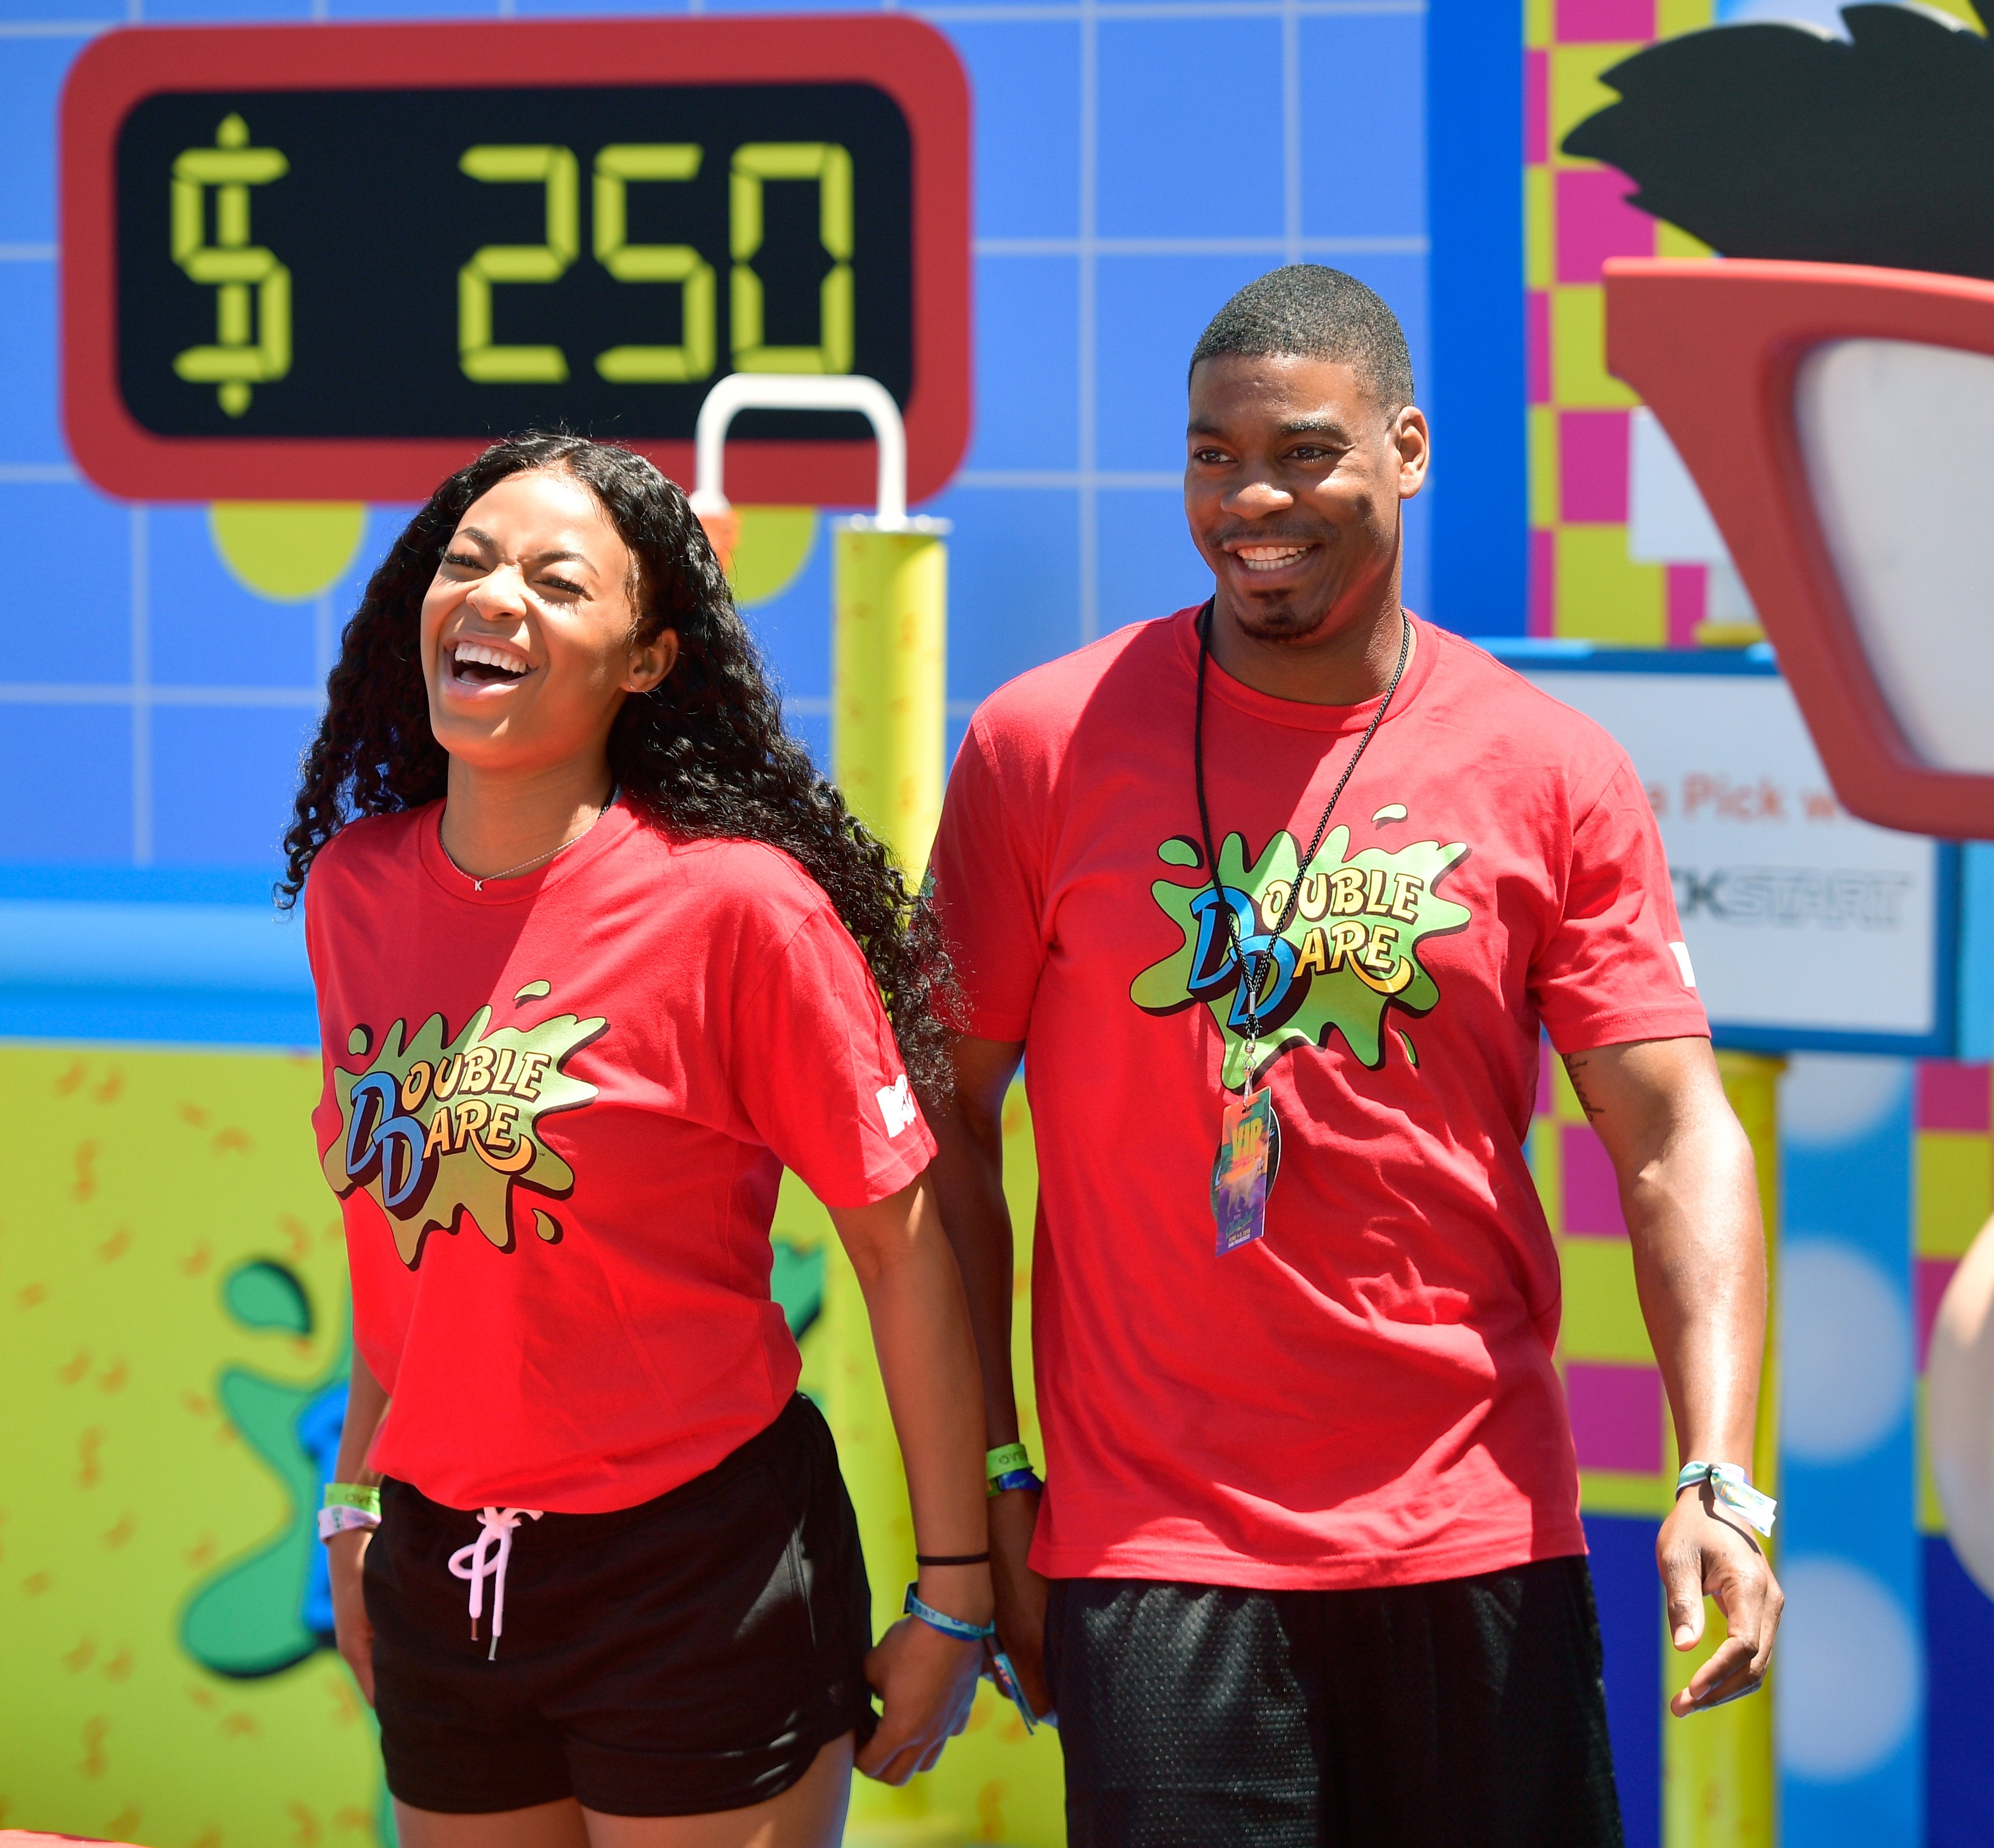 Kam Williams and Leroy Garrett attend Double Dare presented by Mtn Dew Kickstart at Comedy Central